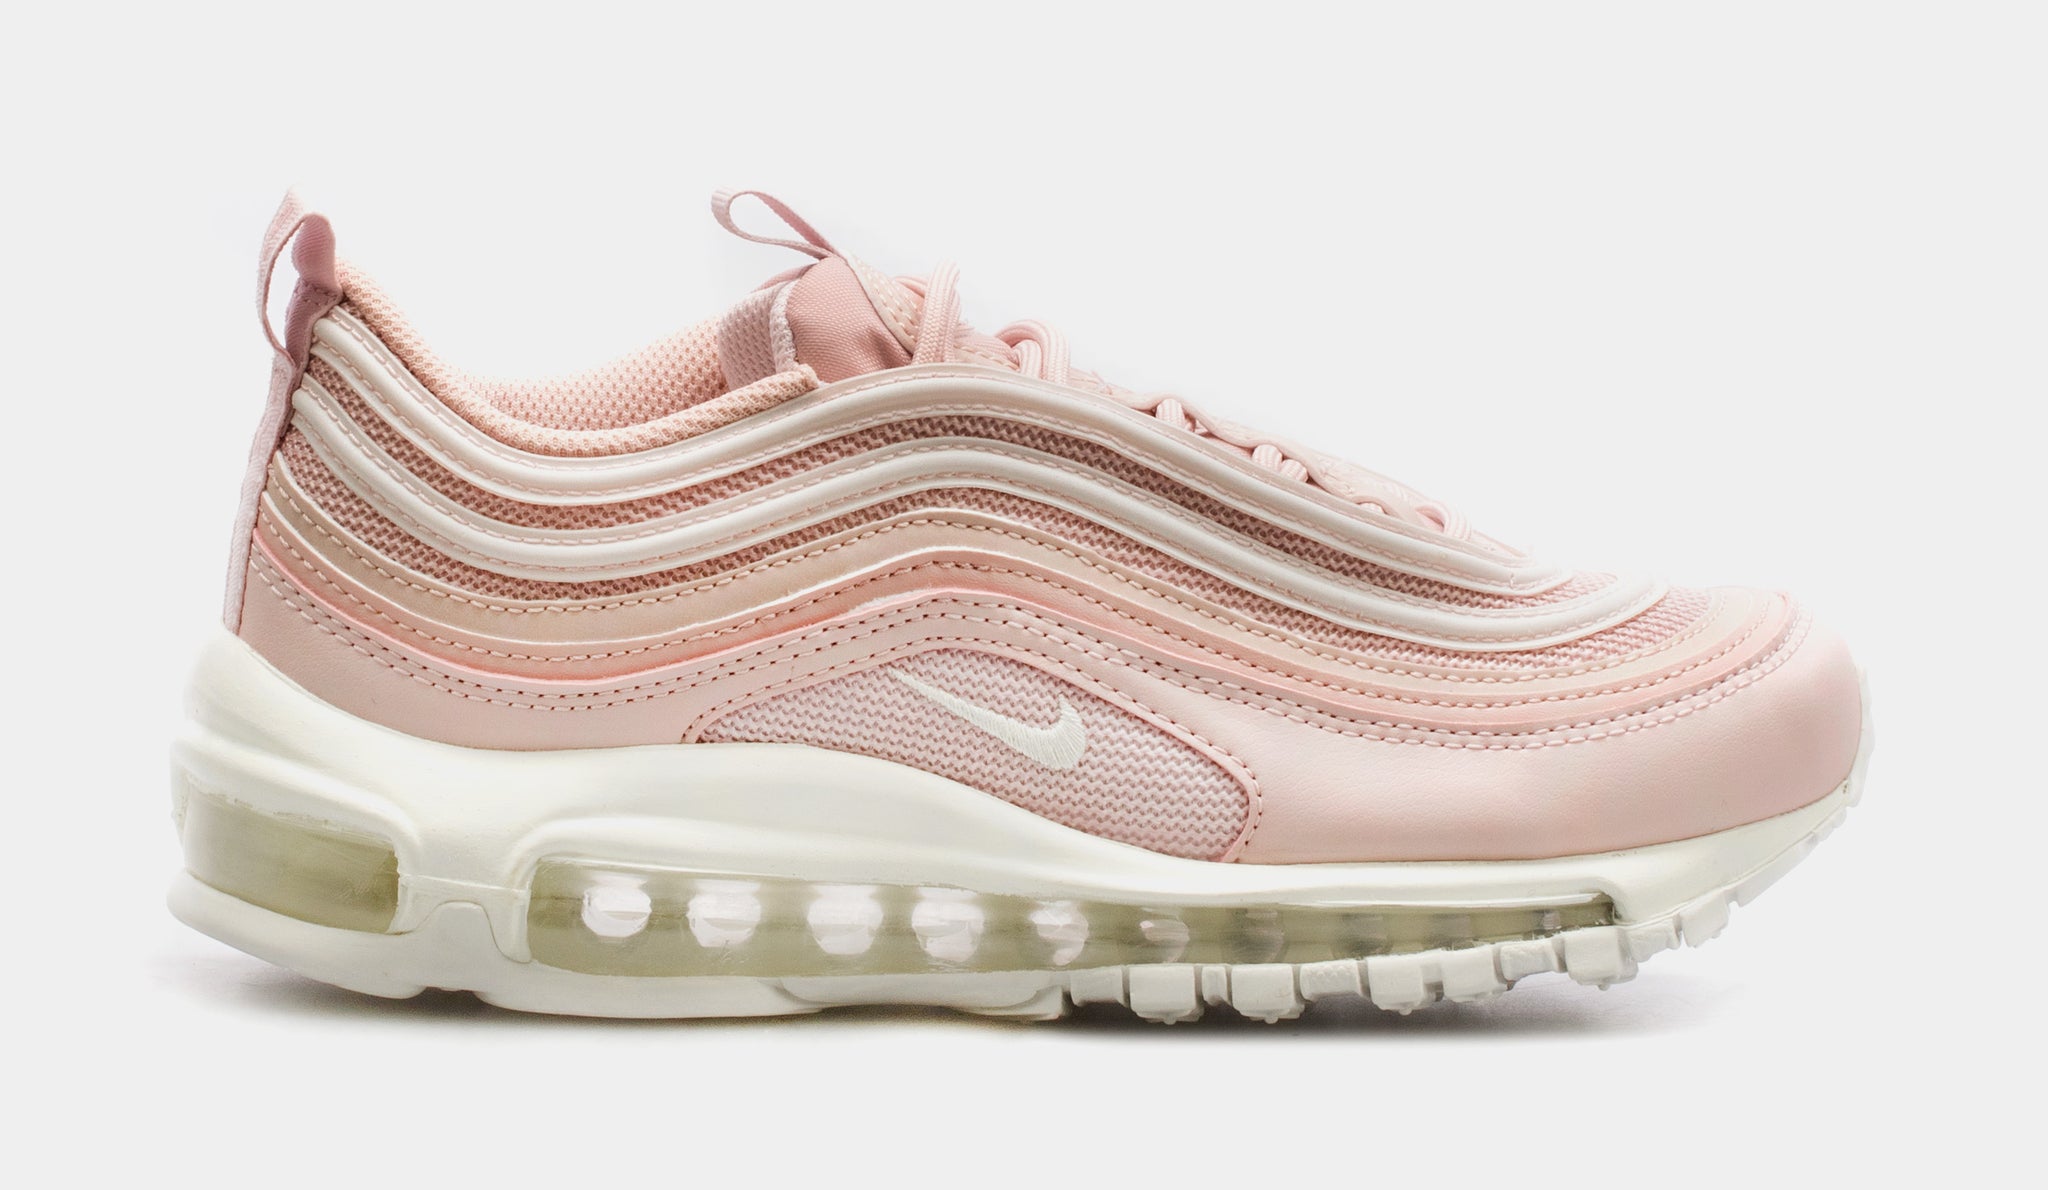 Waardeloos ontploffing kin Nike Air Max 97 Womens Lifestyle Shoes Pink DH8016-600 – Shoe Palace